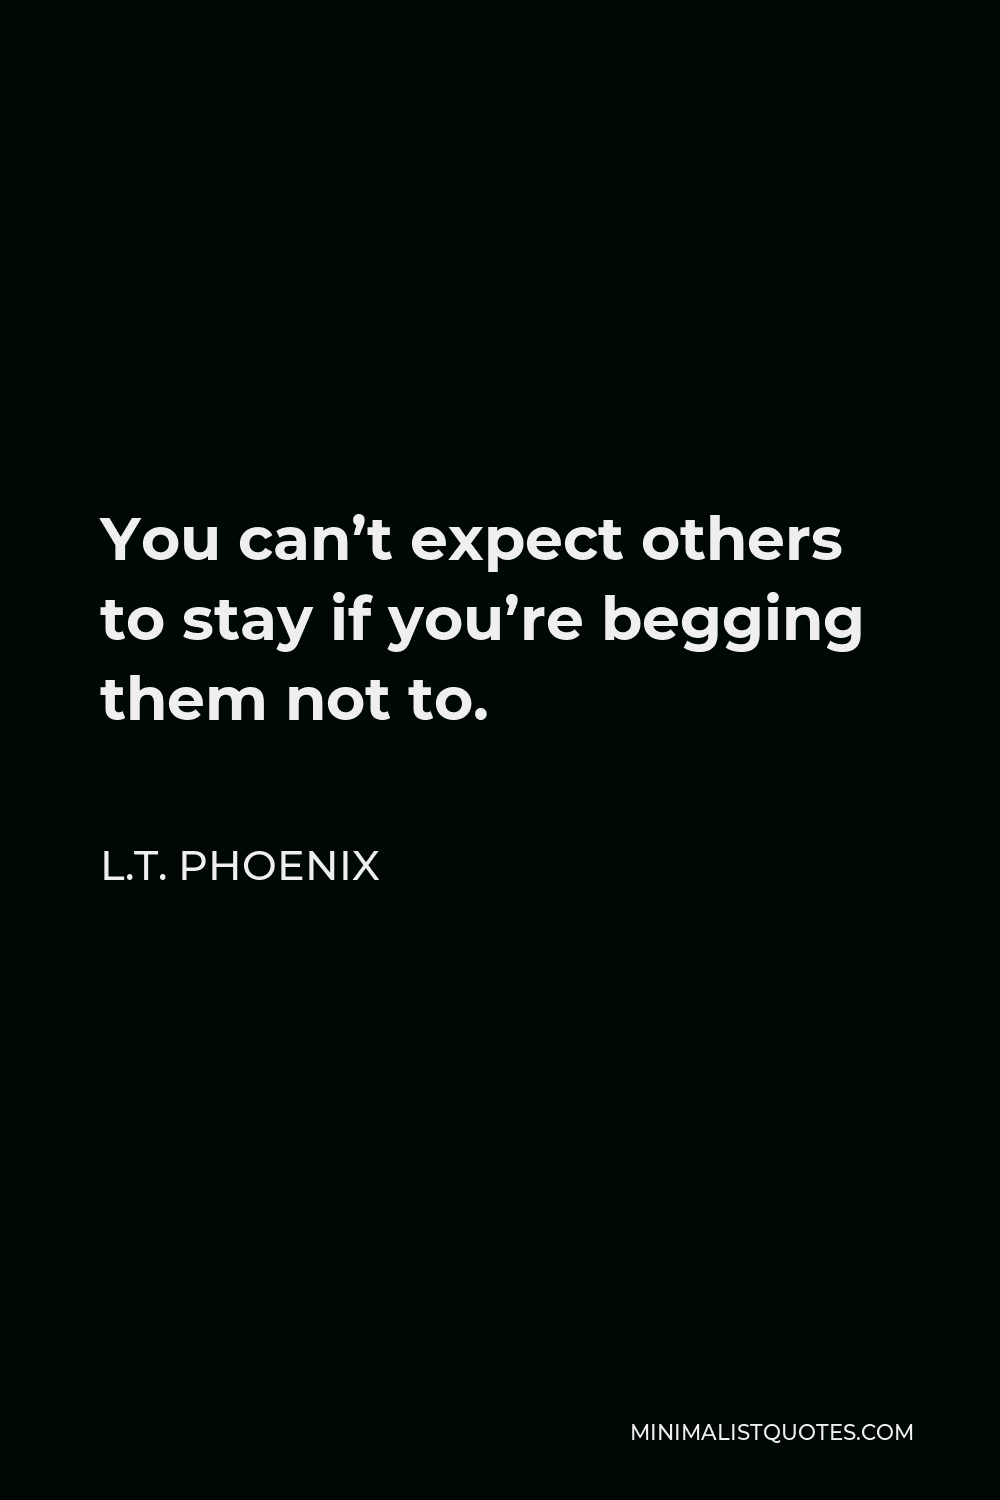 L.T. Phoenix Quote - You can’t expect others to stay if you’re begging them not to.